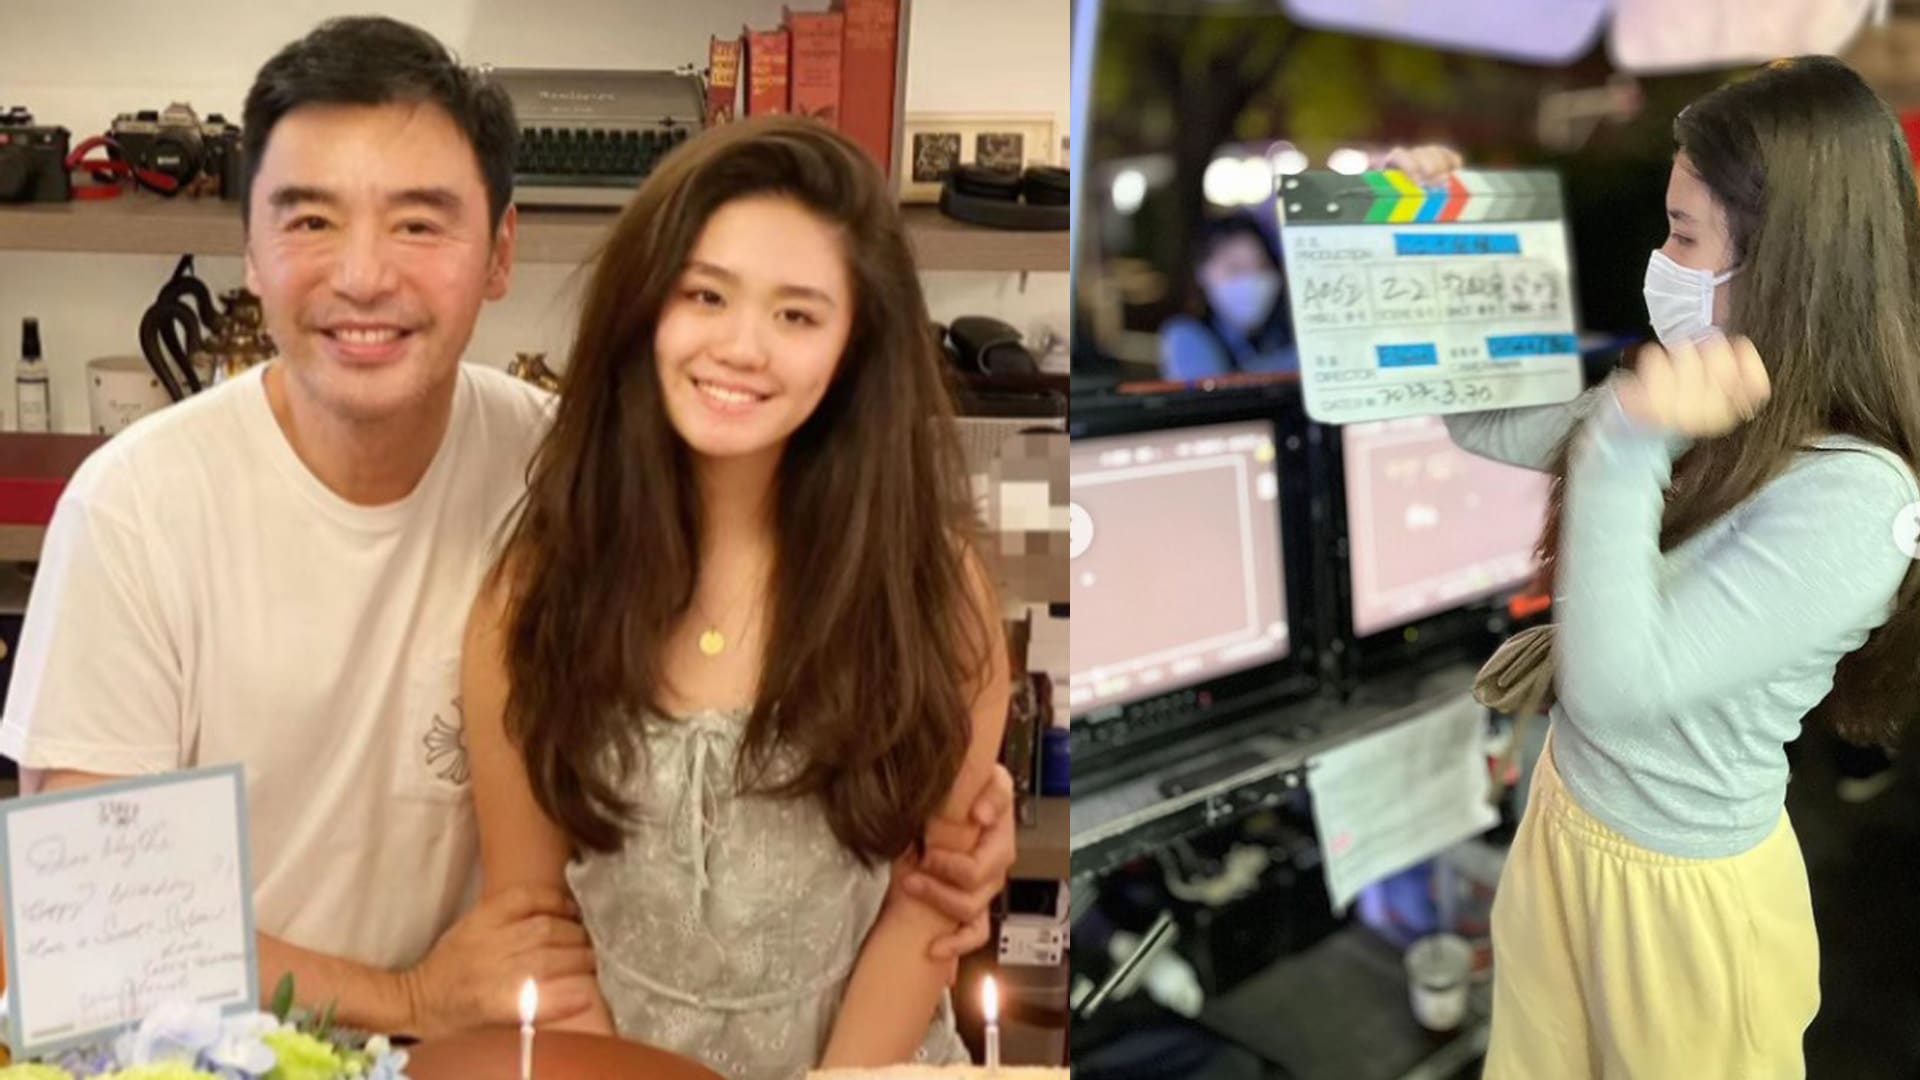 Kenny Bee’s 17-Year-Old Daughter To Study Film In The UK, Got Accepted Into 3 Top Universities There